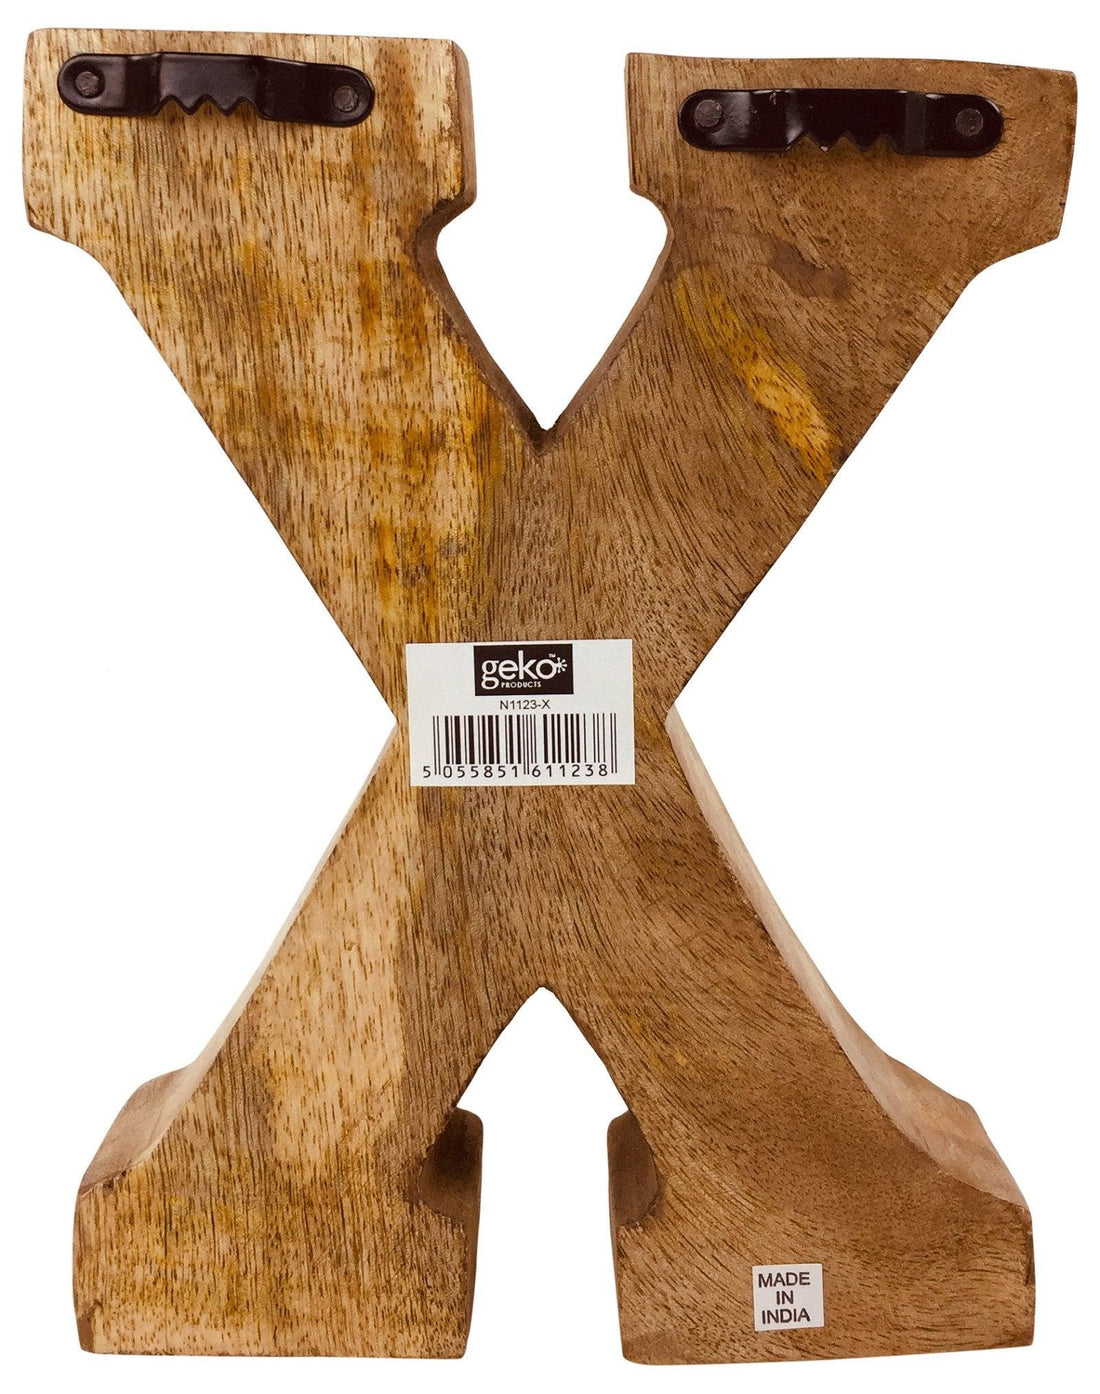 Hand Carved Wooden Embossed Letter X - £18.99 - Single Letters 